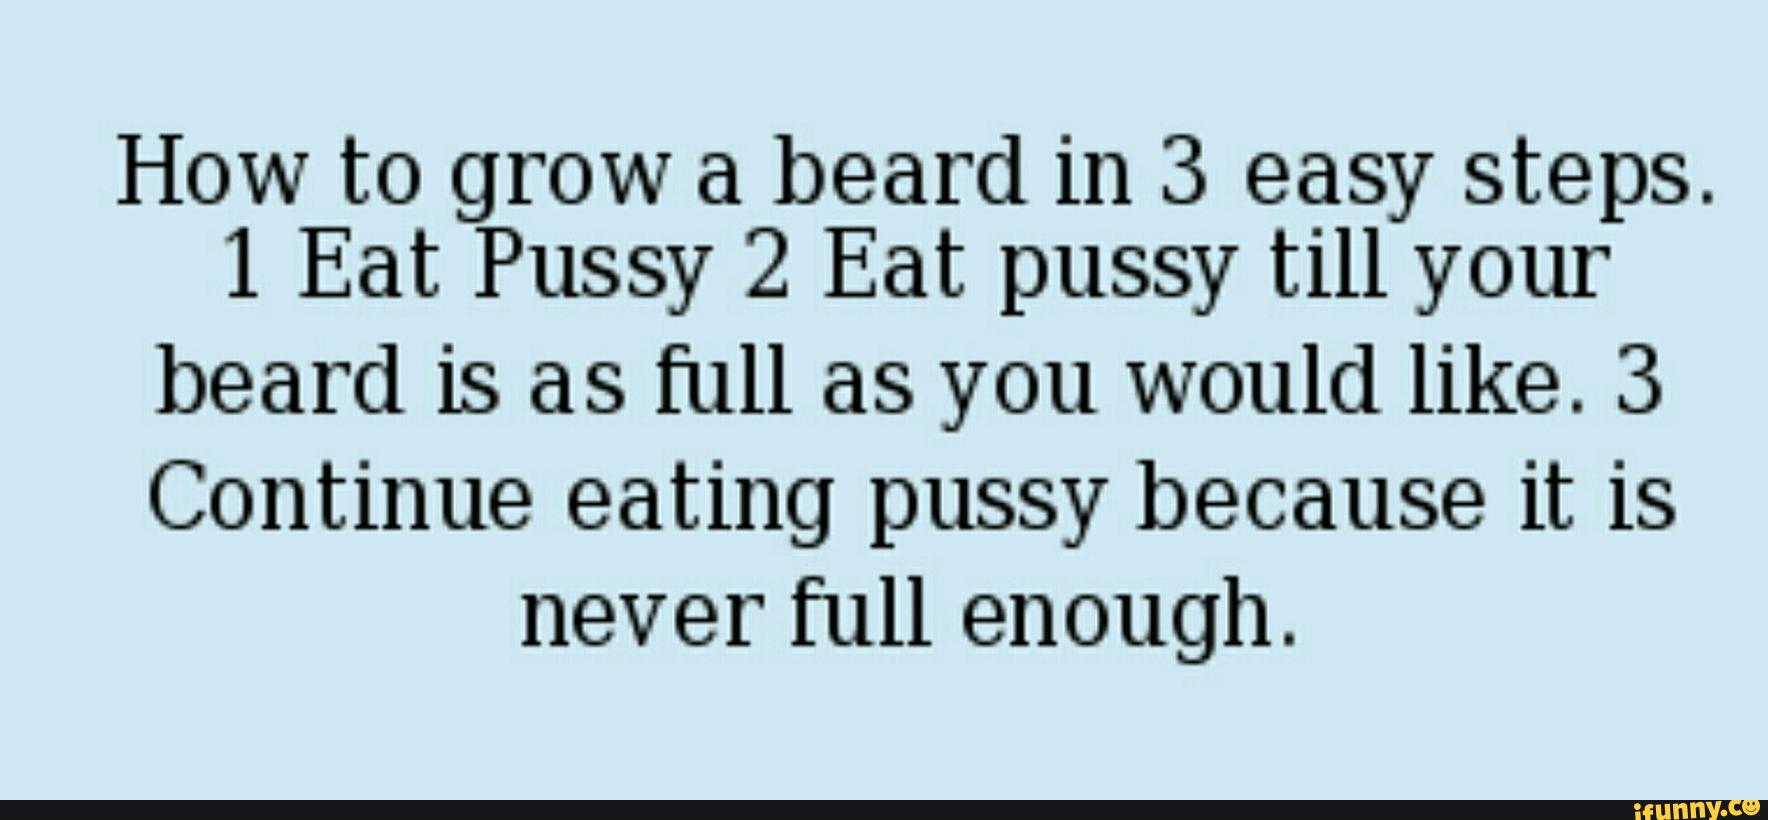 Steps to eating pussy